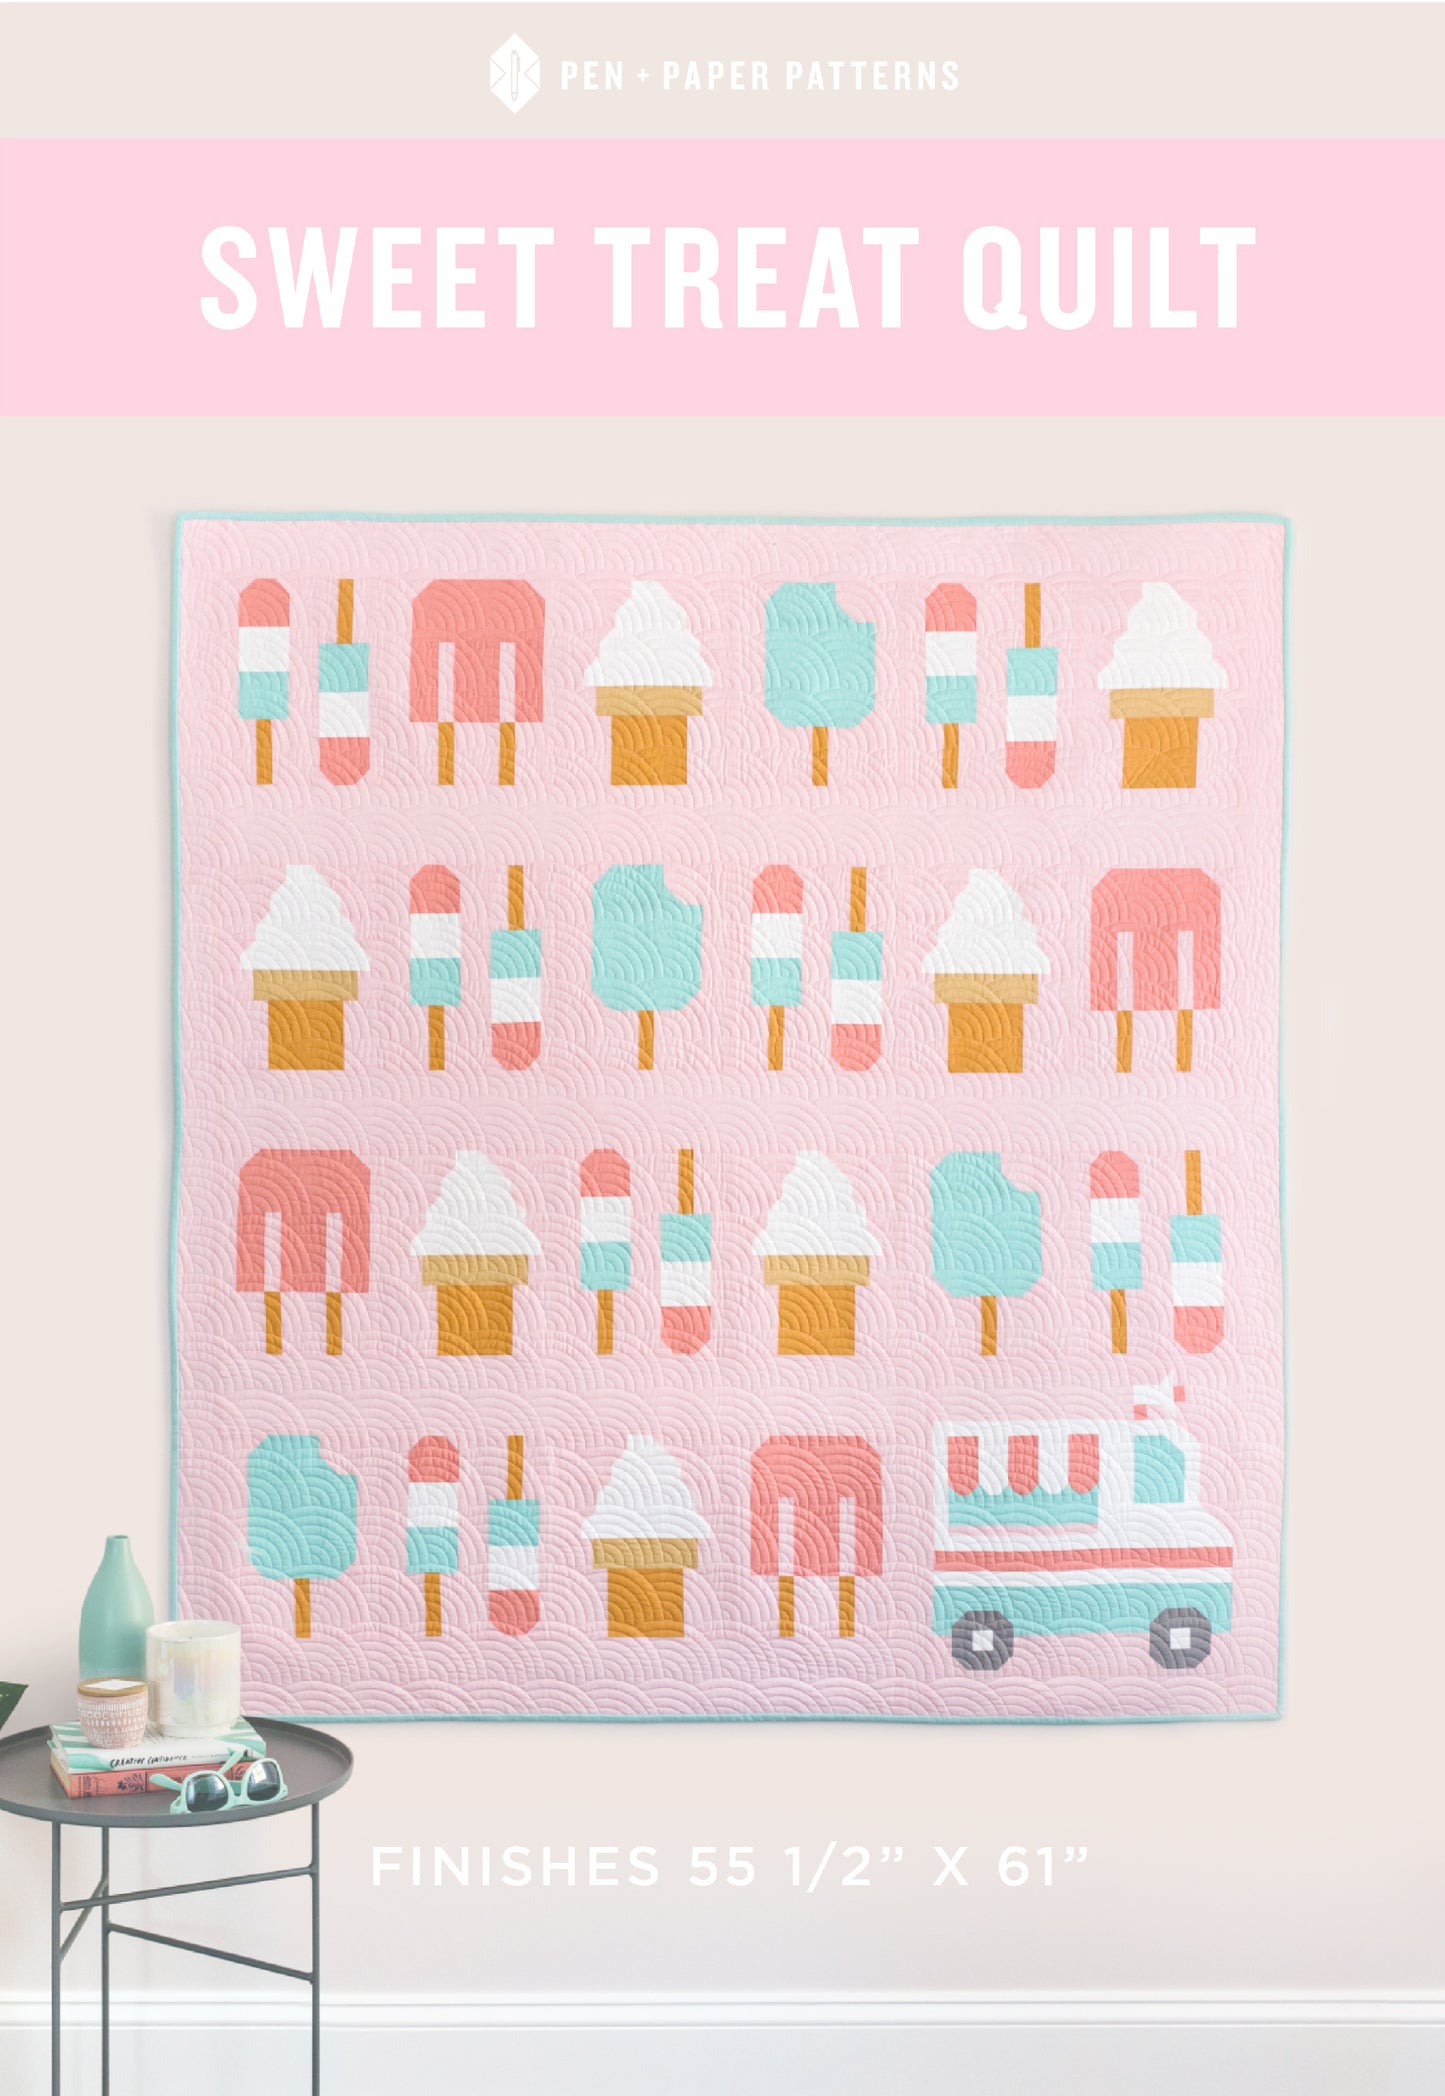 Sweet Treat Quilt Pattern by Pen and Paper Patterns